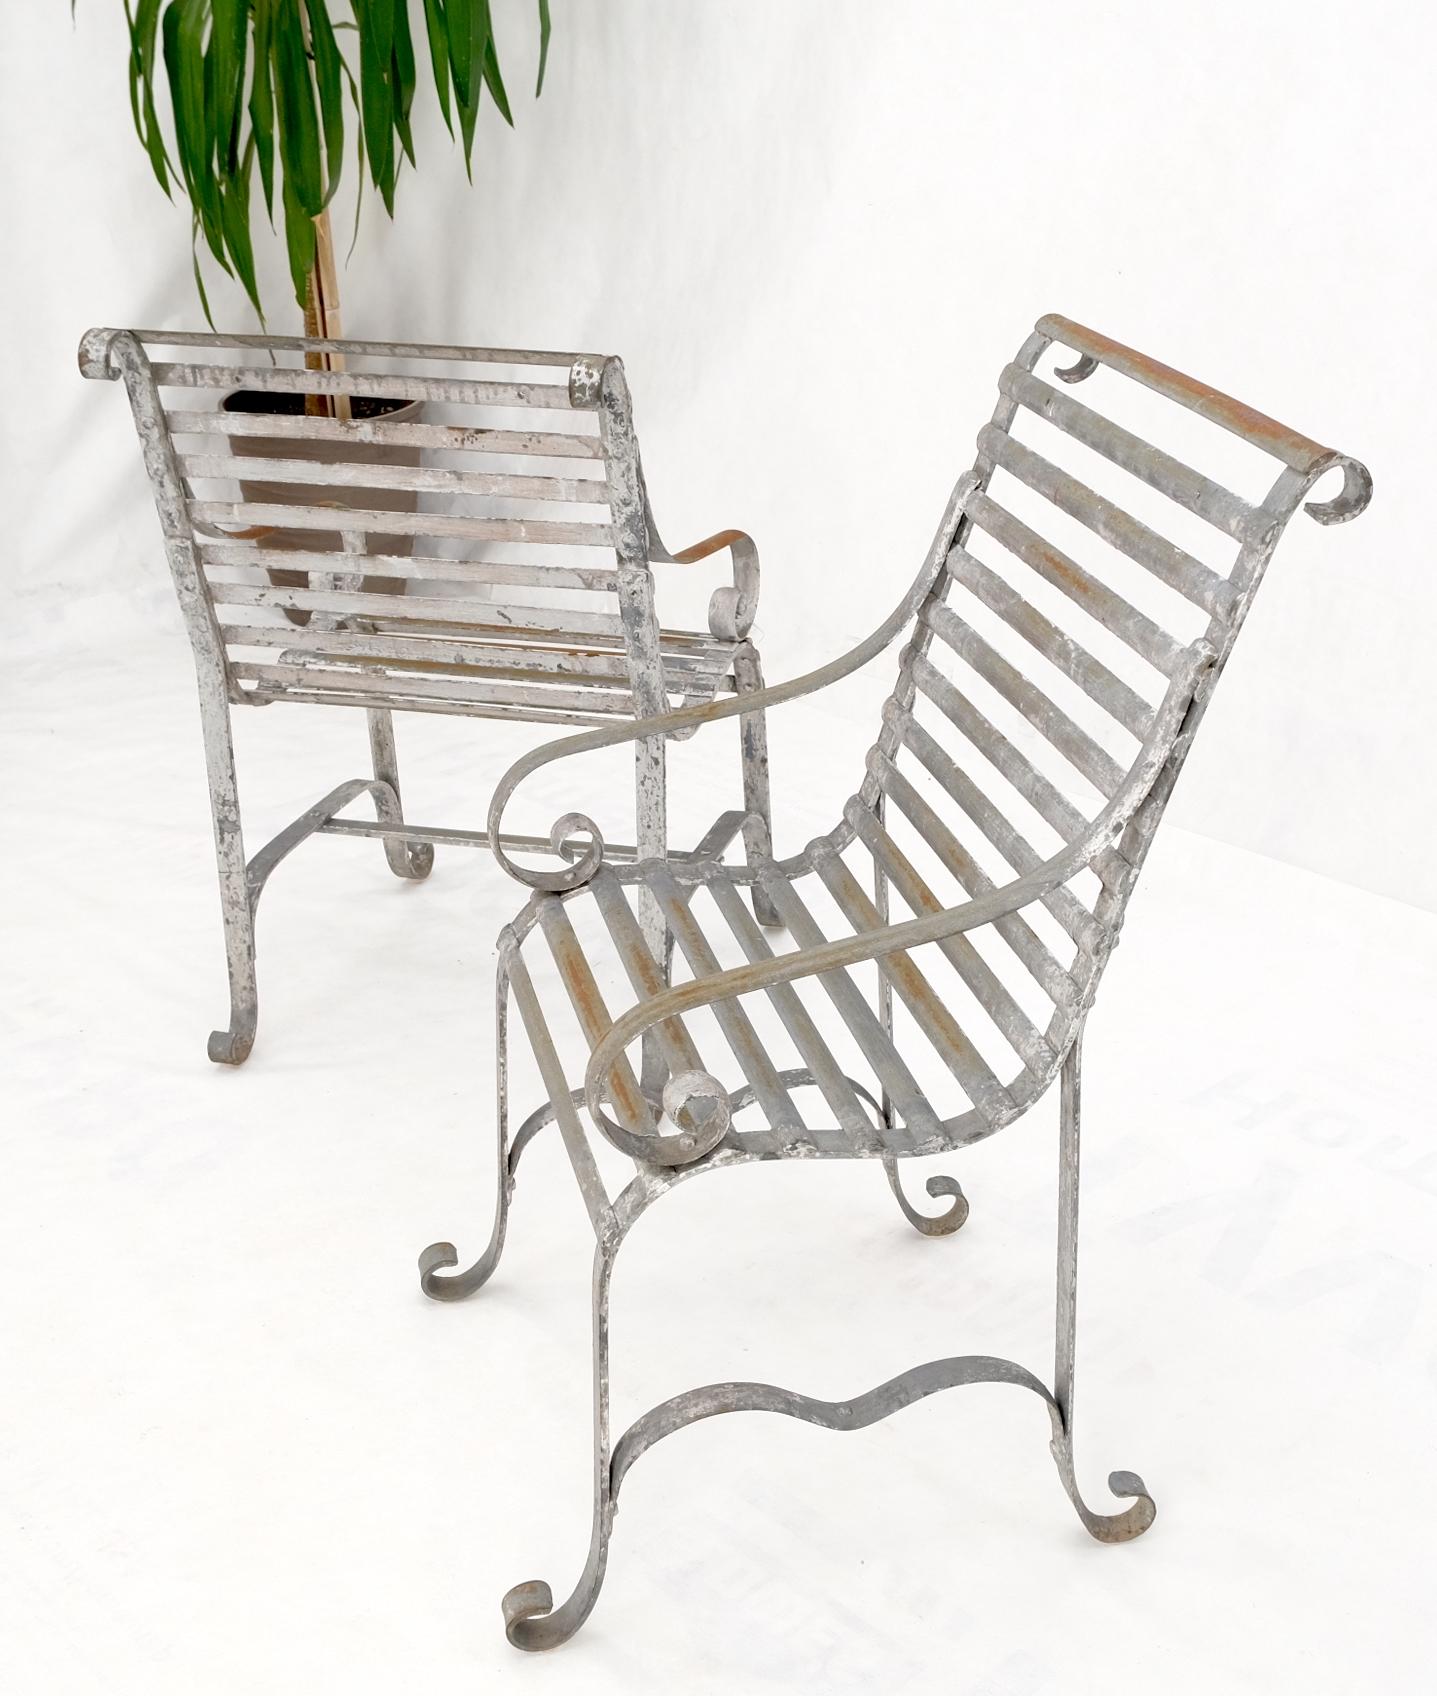 Heavy antique wrought iron outdoor chairs his & hers.
Metal ribs slots and rivets design, good looking form.